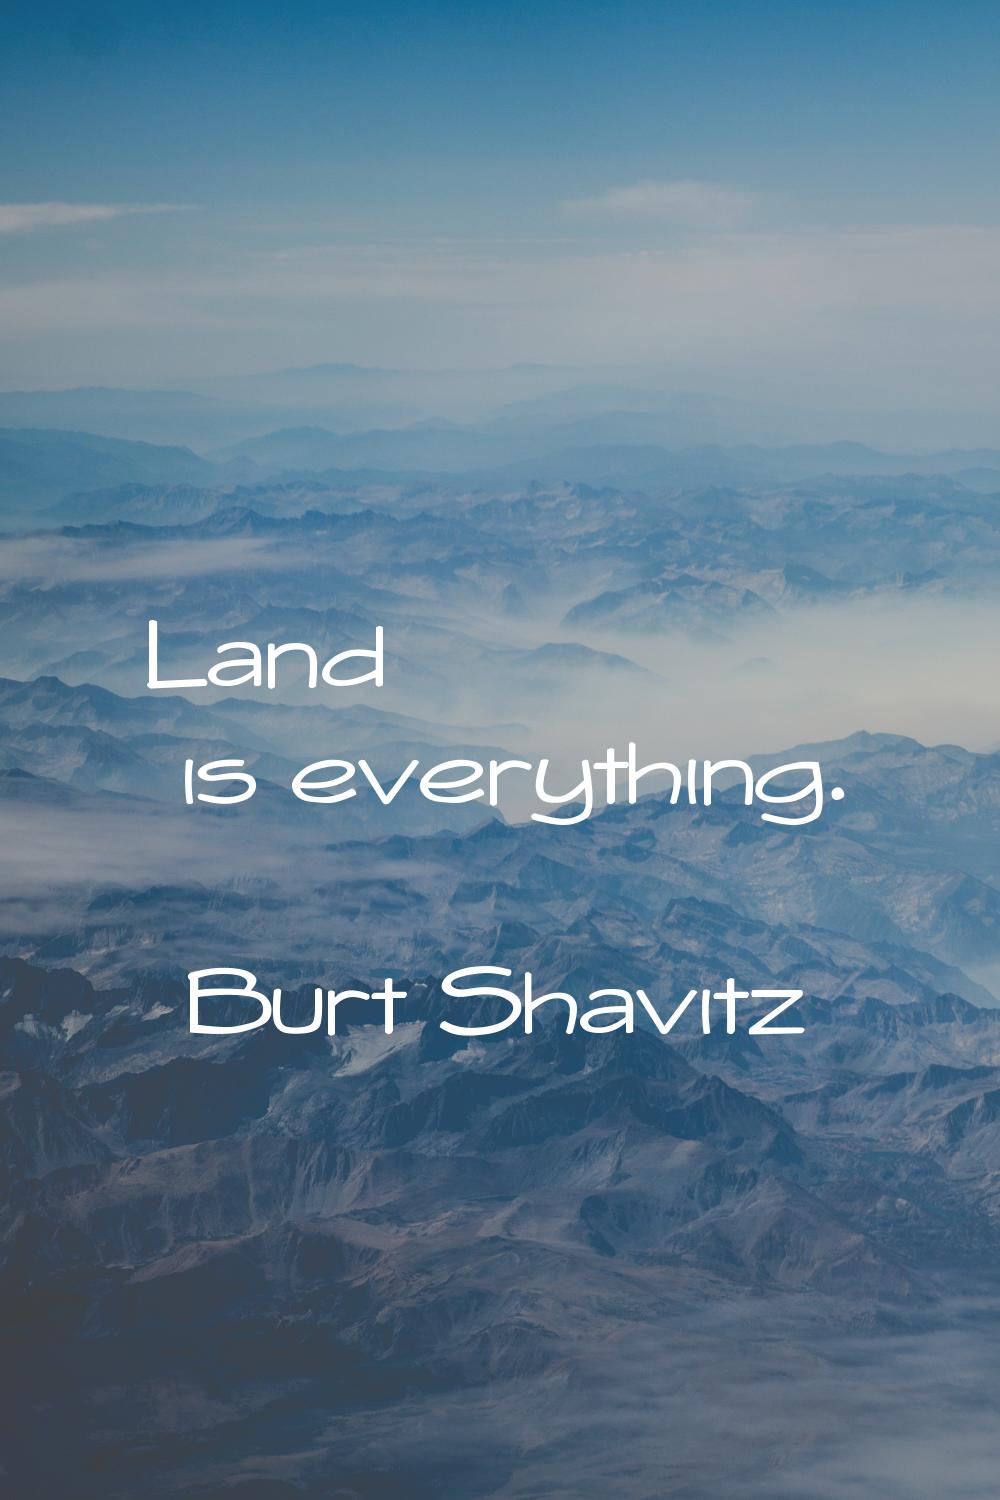 Land is everything.